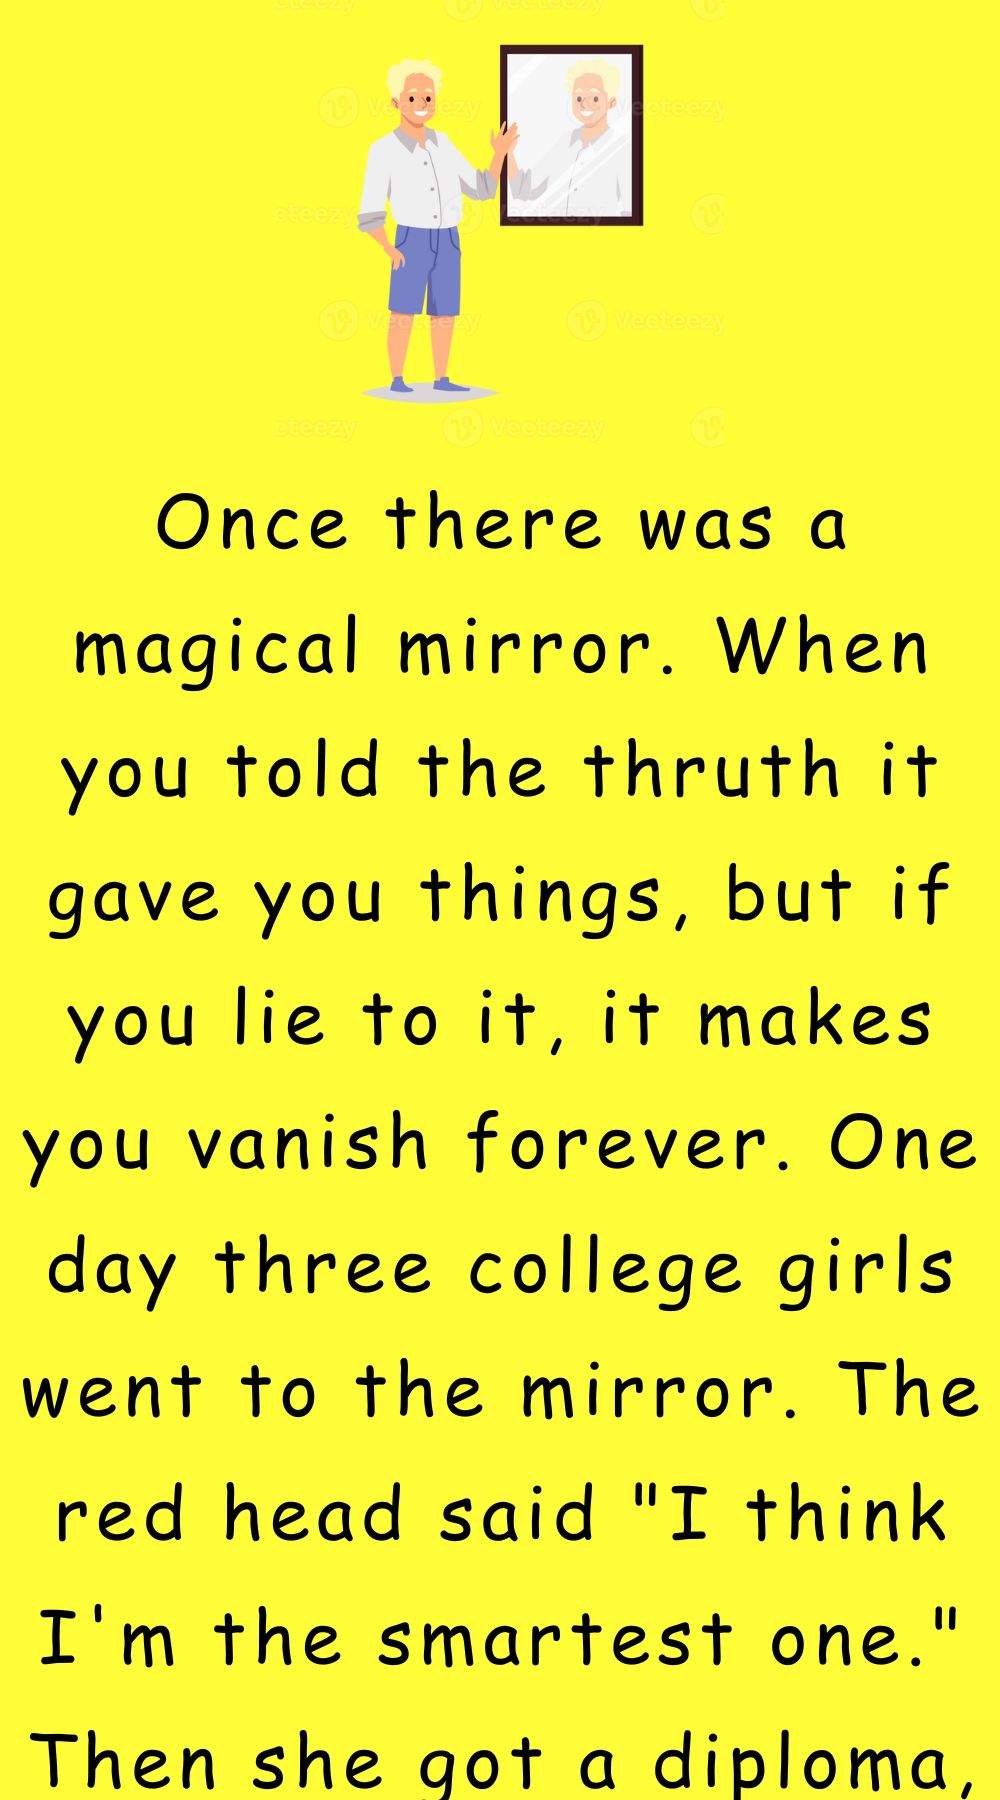 Once there was a magical mirror